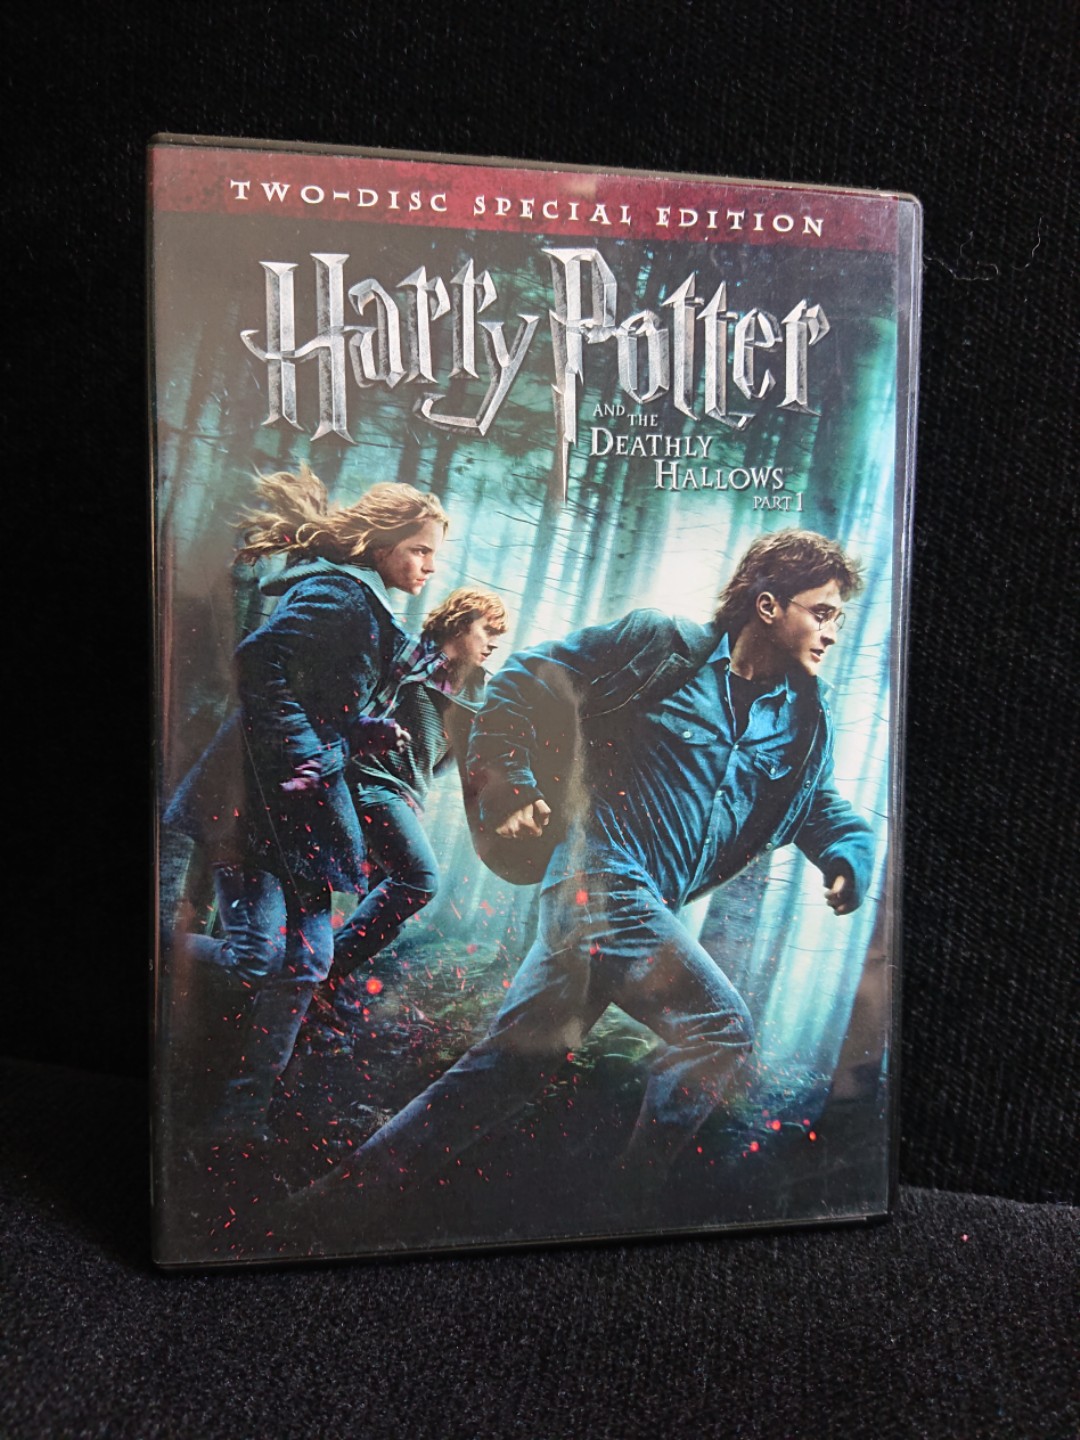 Special　on　Potter　Part　DVDs　Hobbies　and　CDs　Hallows　Media,　Music　Toys,　Harry　Edition),　(2-disc　Deathly　the　Dvd:　Carousell